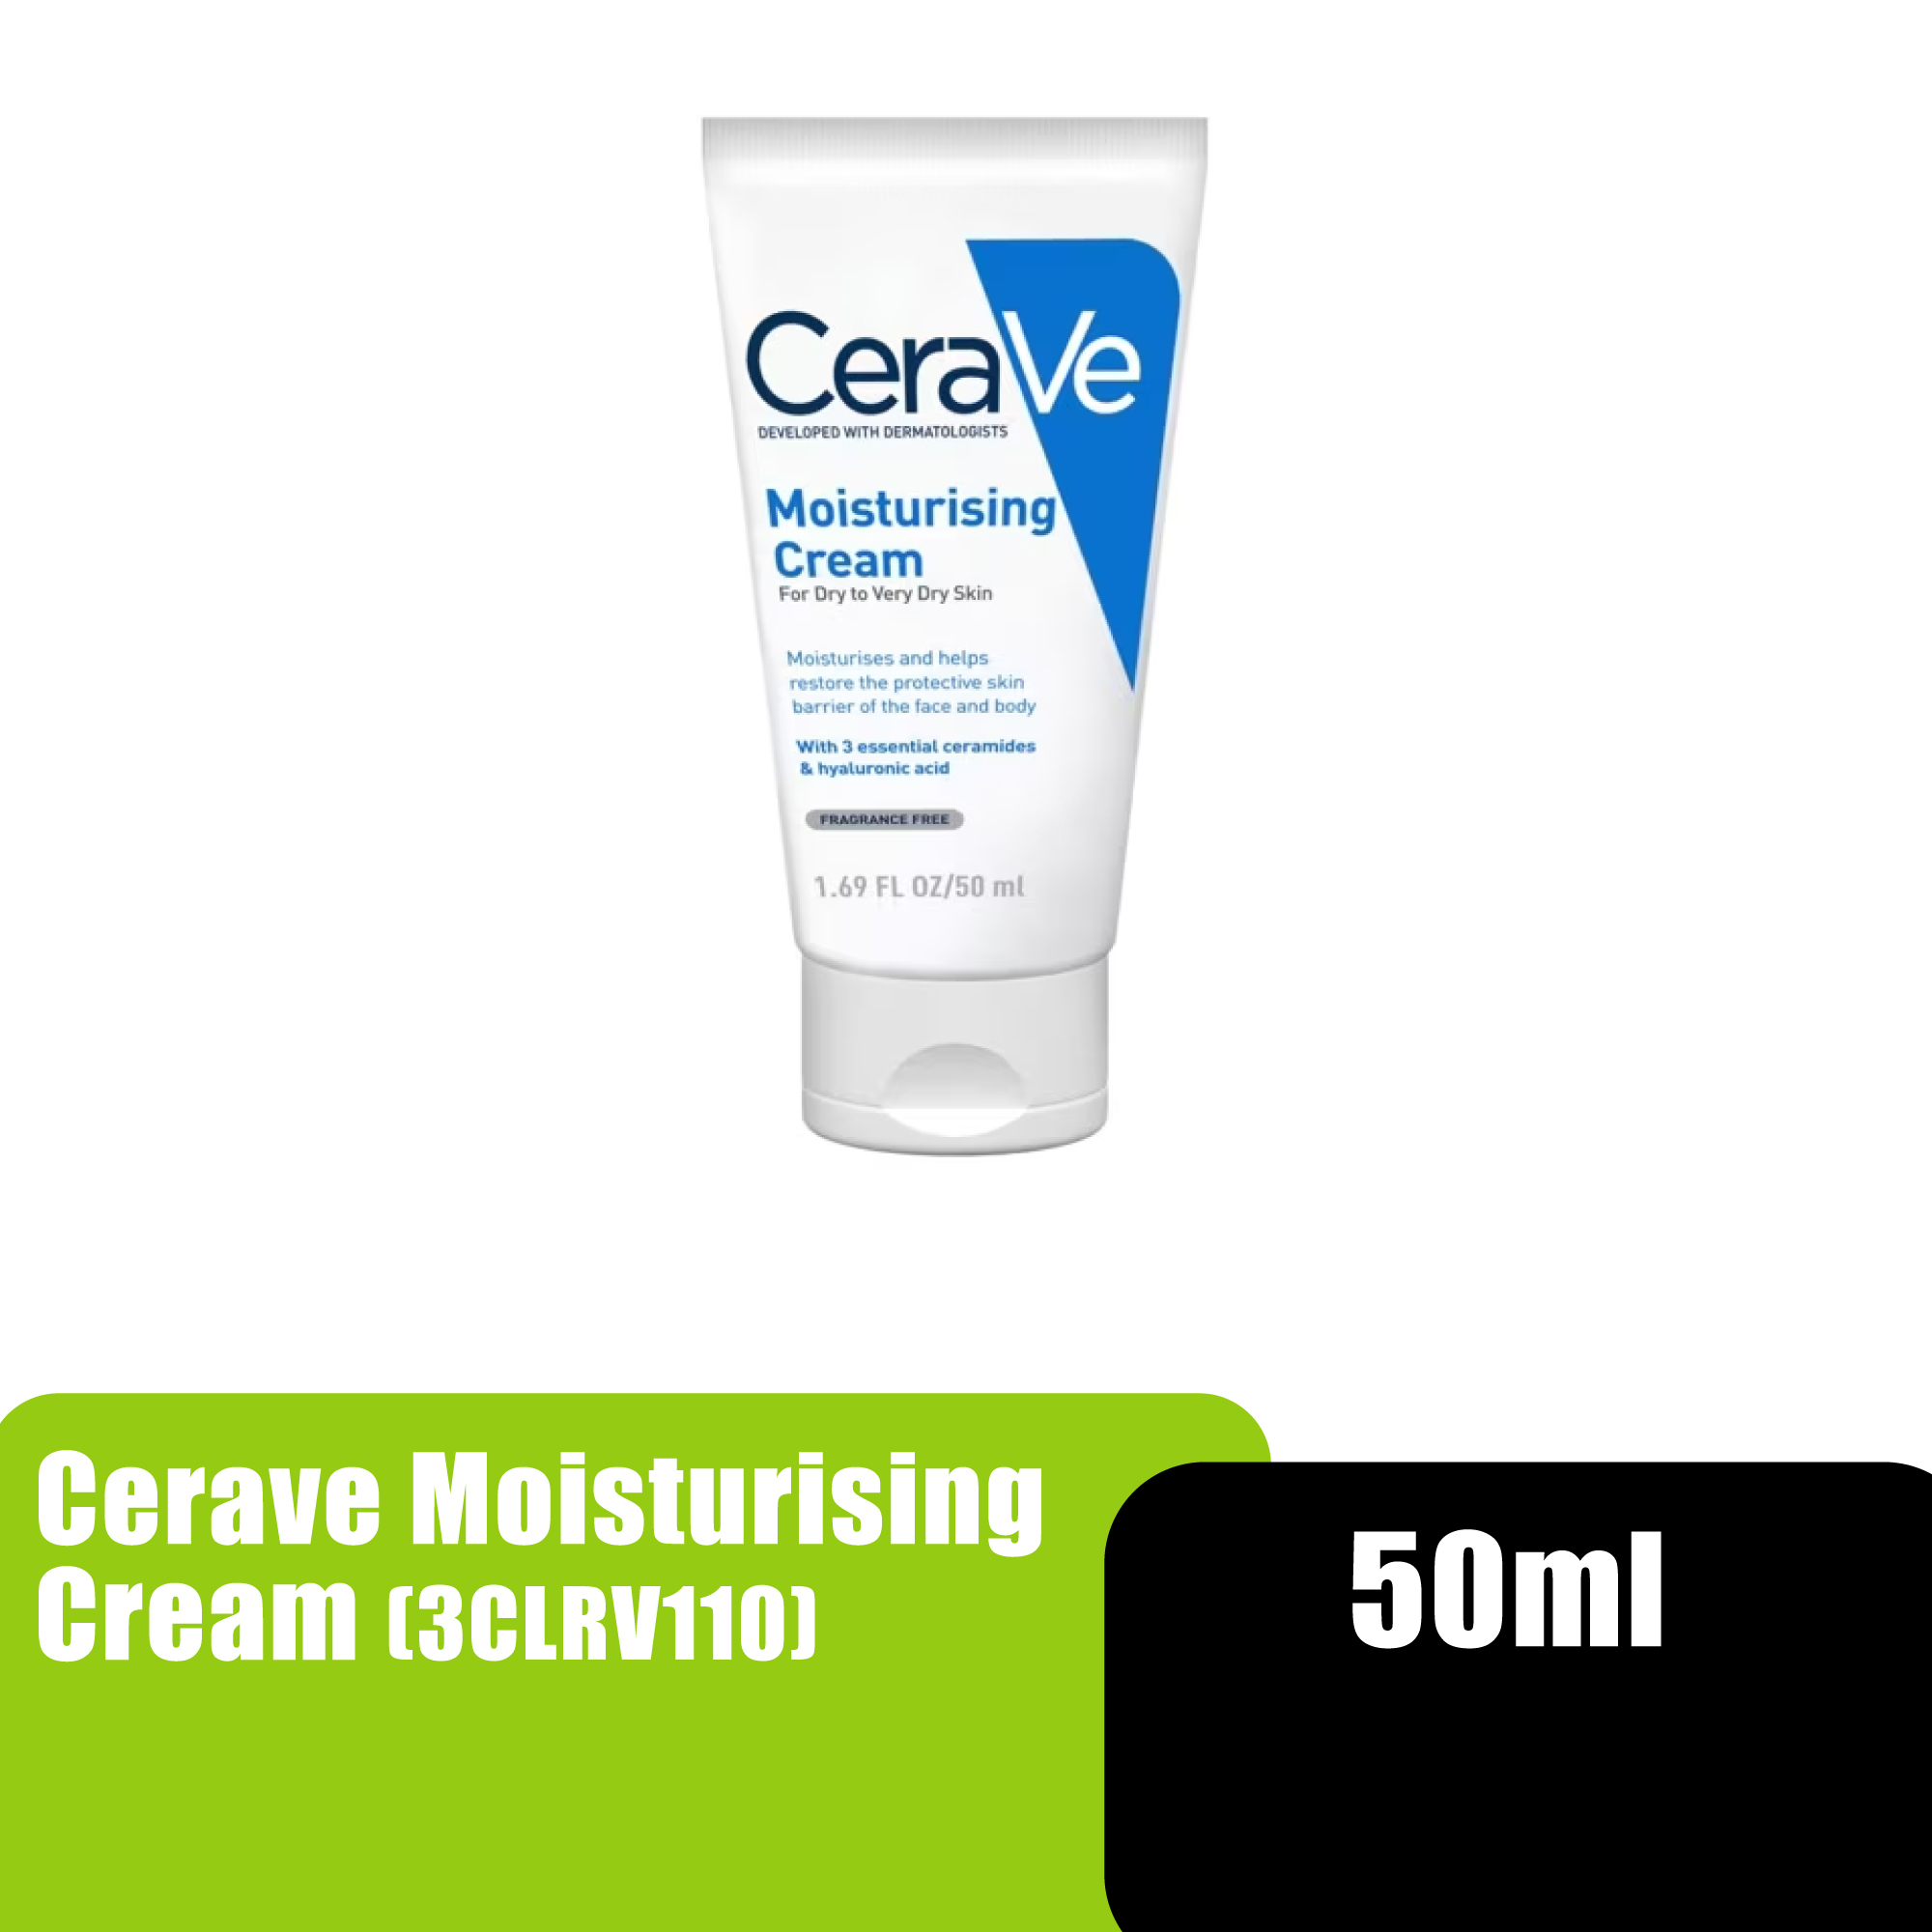 Cerave Moisturizing Cream with Essential Ceramides 50ml (For normal to dry skin on the face and body)